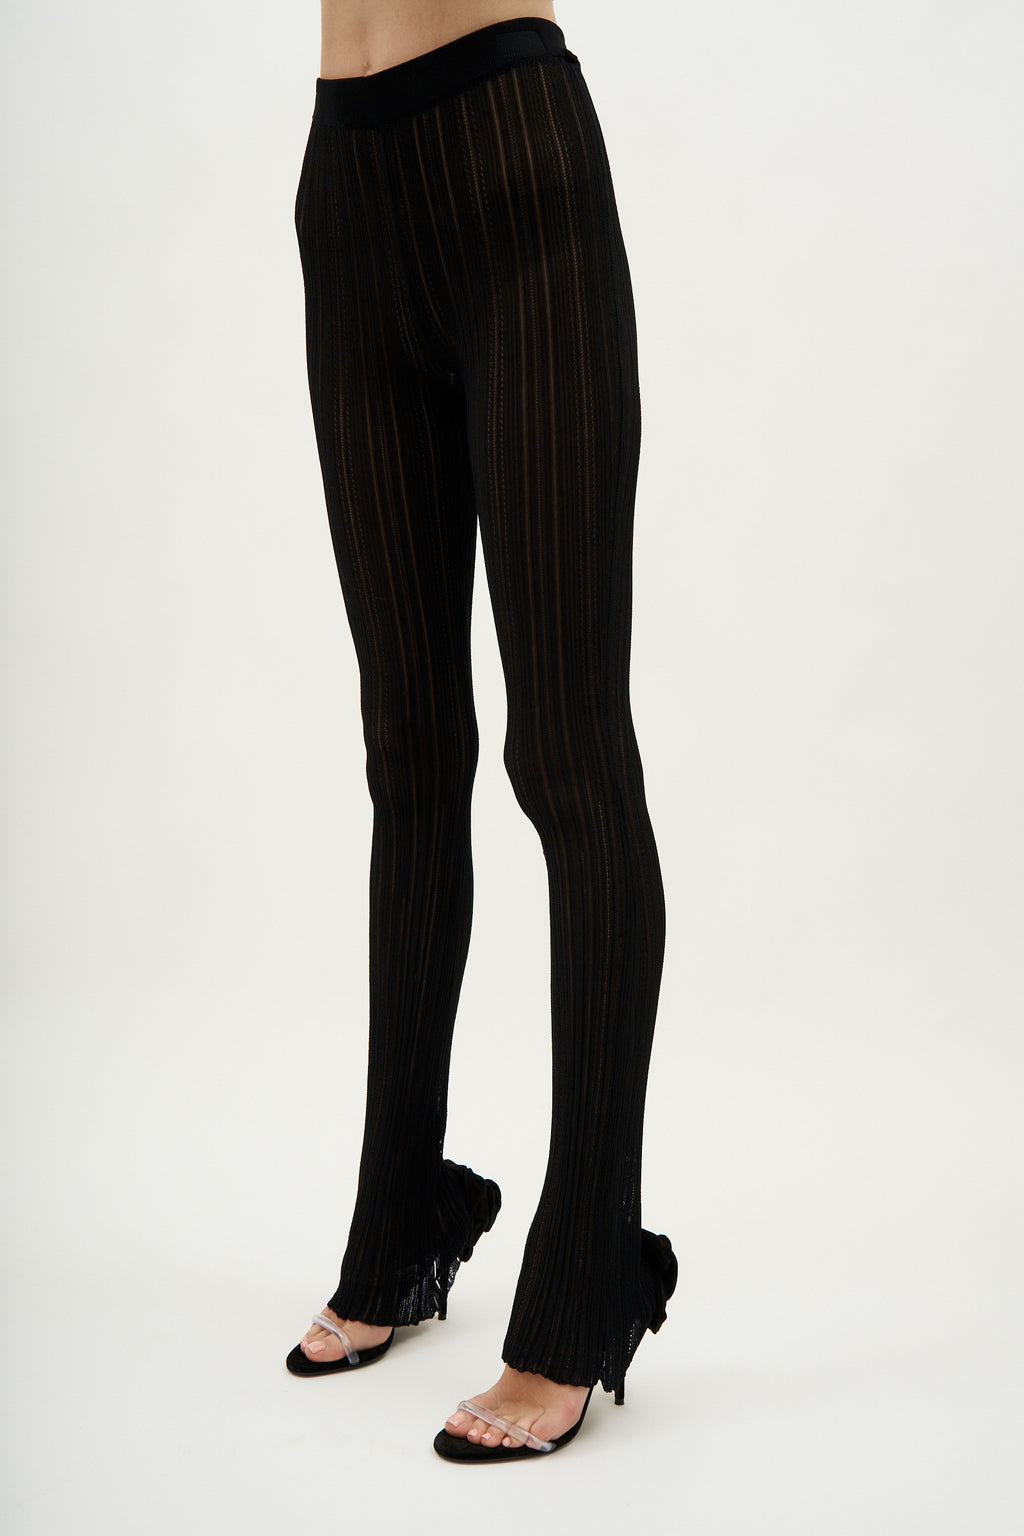 Giulio Black Knit Trousers